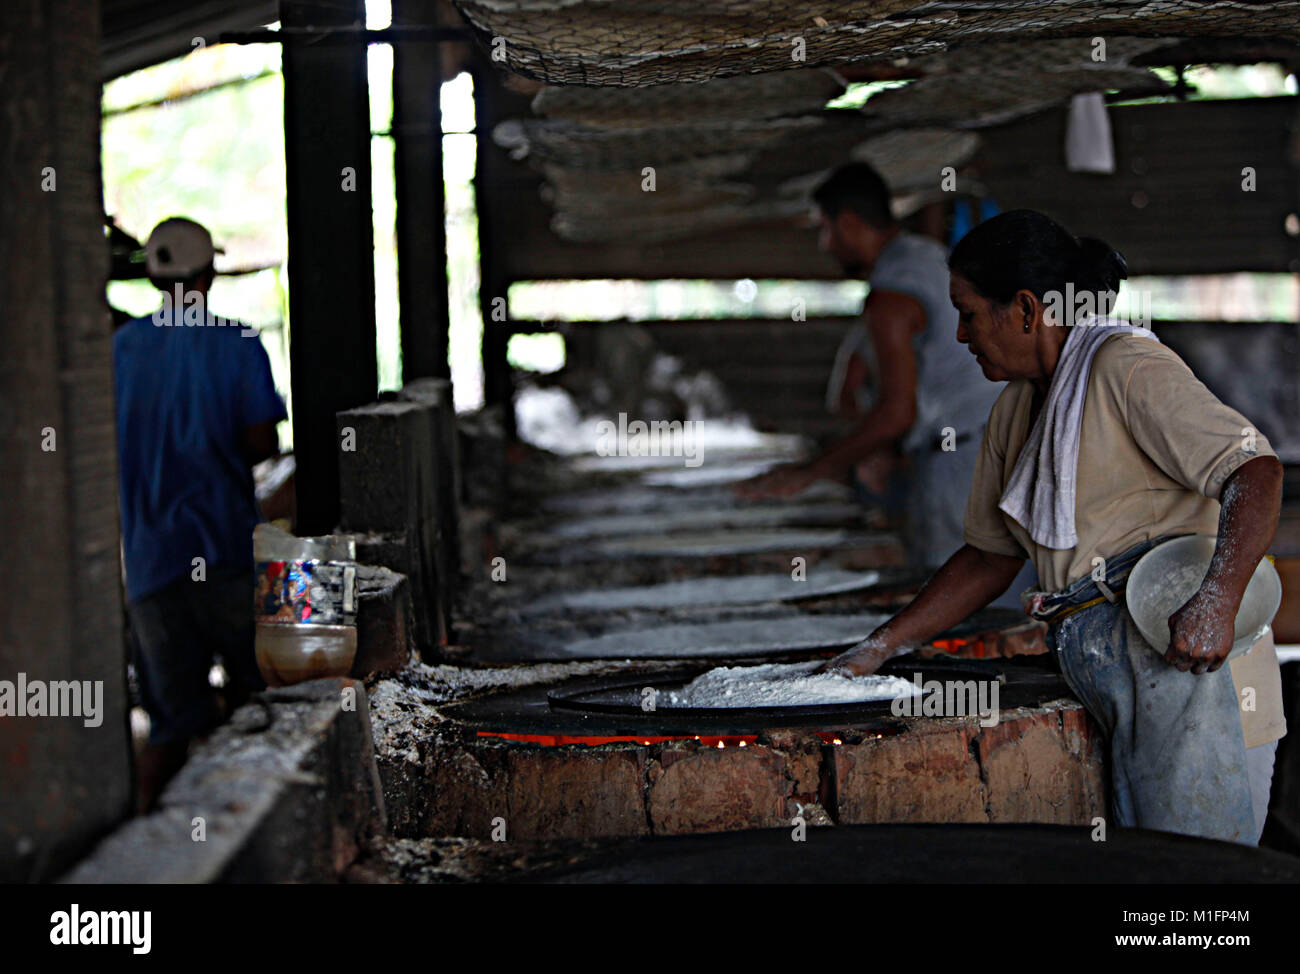 December 8, 2012 - Maturin, Monagas, Venezuela - december 09, 2012.  Tenderers start the cooking of the cakes in the budares.The casabe or cazabe is part of the tradition of the Venezuelan as its indigenous people elaborated it and it is known as the Venezuelan bread. In the city of Maturâ€™n, Monagas state. Venezuela .foto: Juan Carlos Hernandez (Credit Image: © Juan Carlos Hernandez via ZUMA Wire) Stock Photo